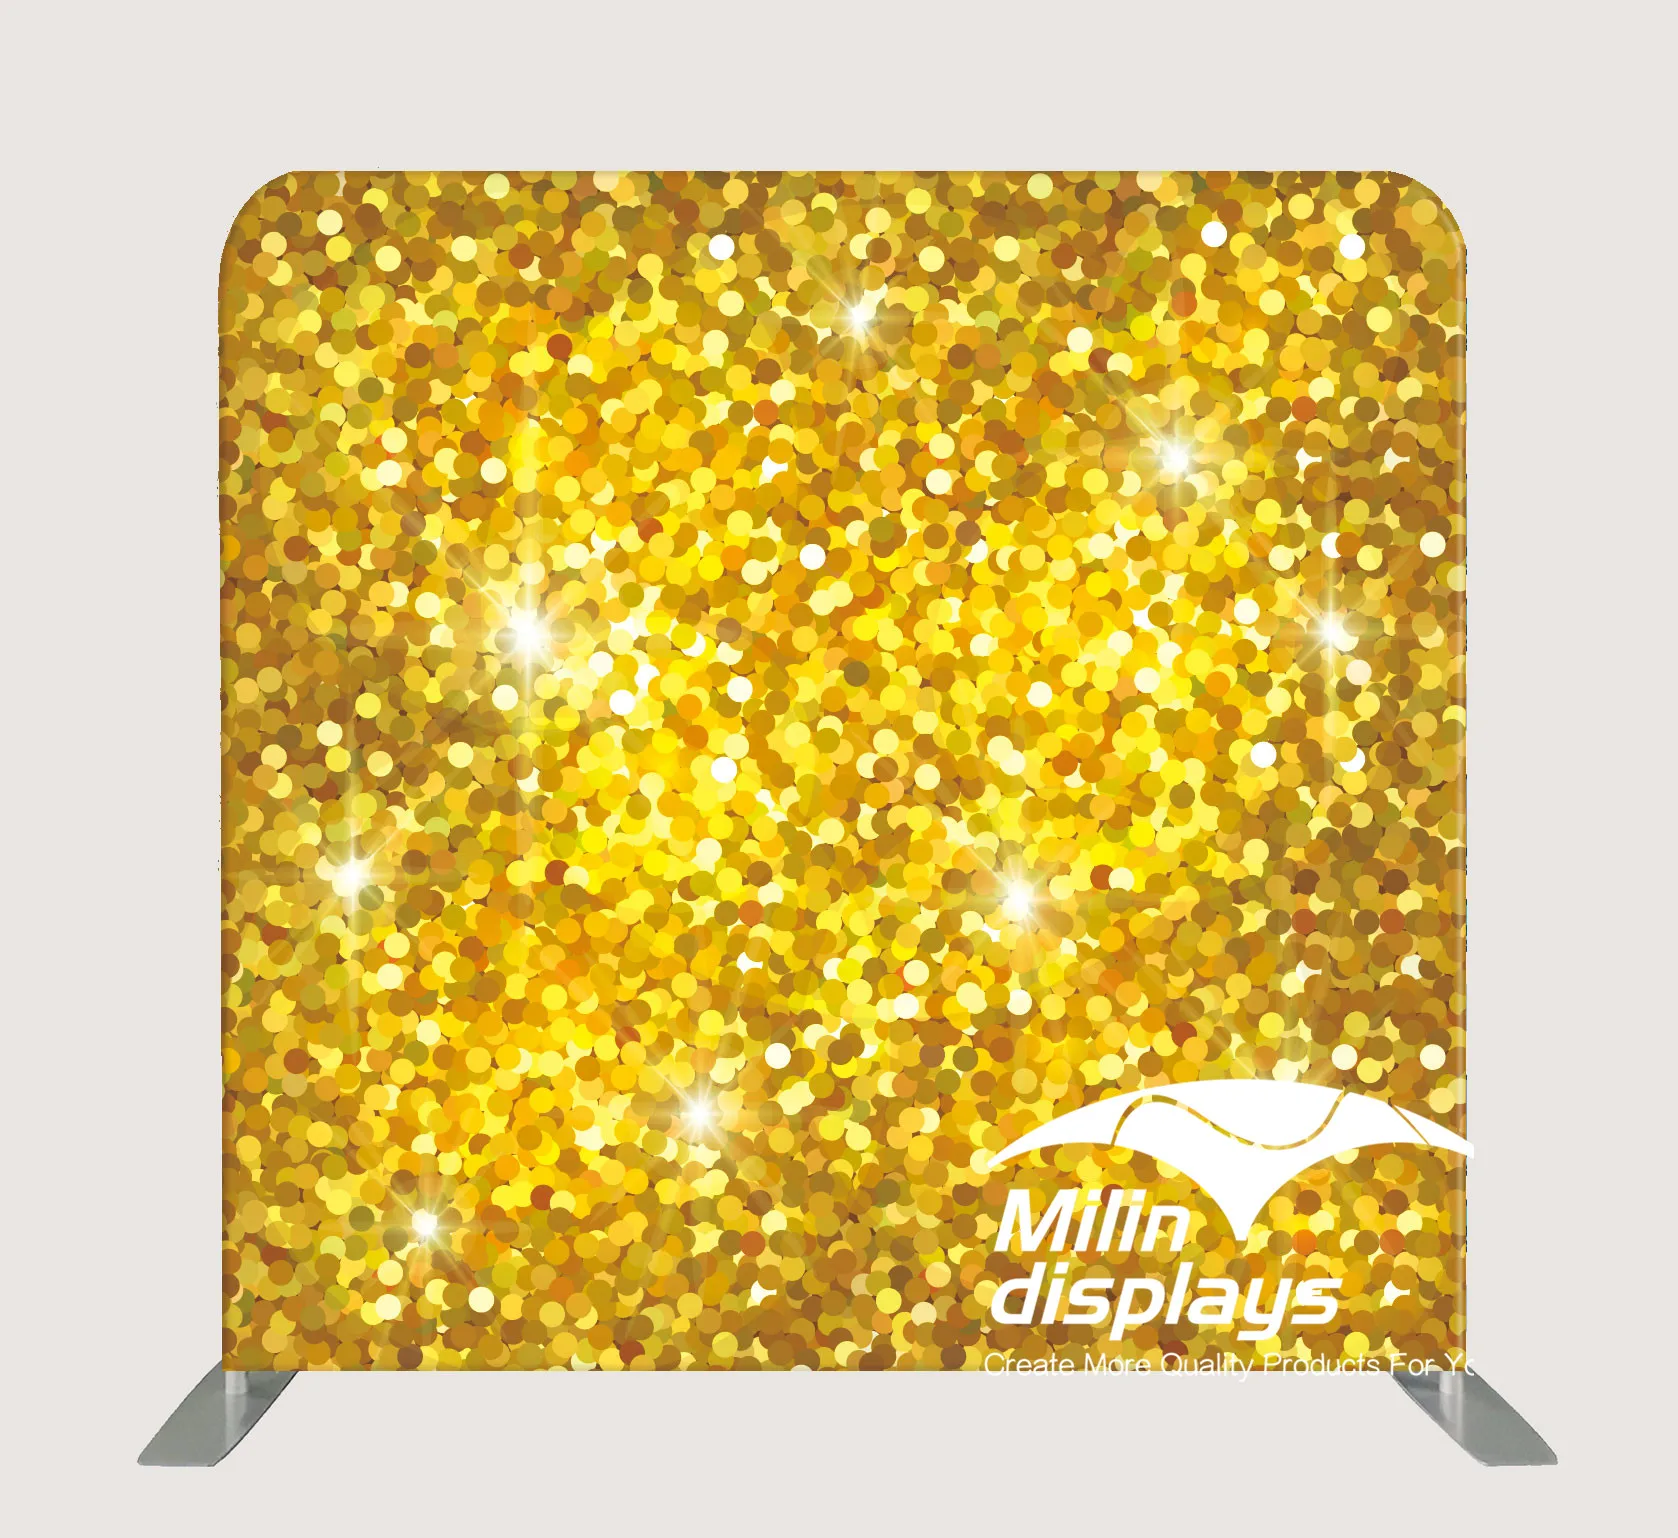 Pillow Cover Backdrop (Large Gold Sequins) - PB Backdrops